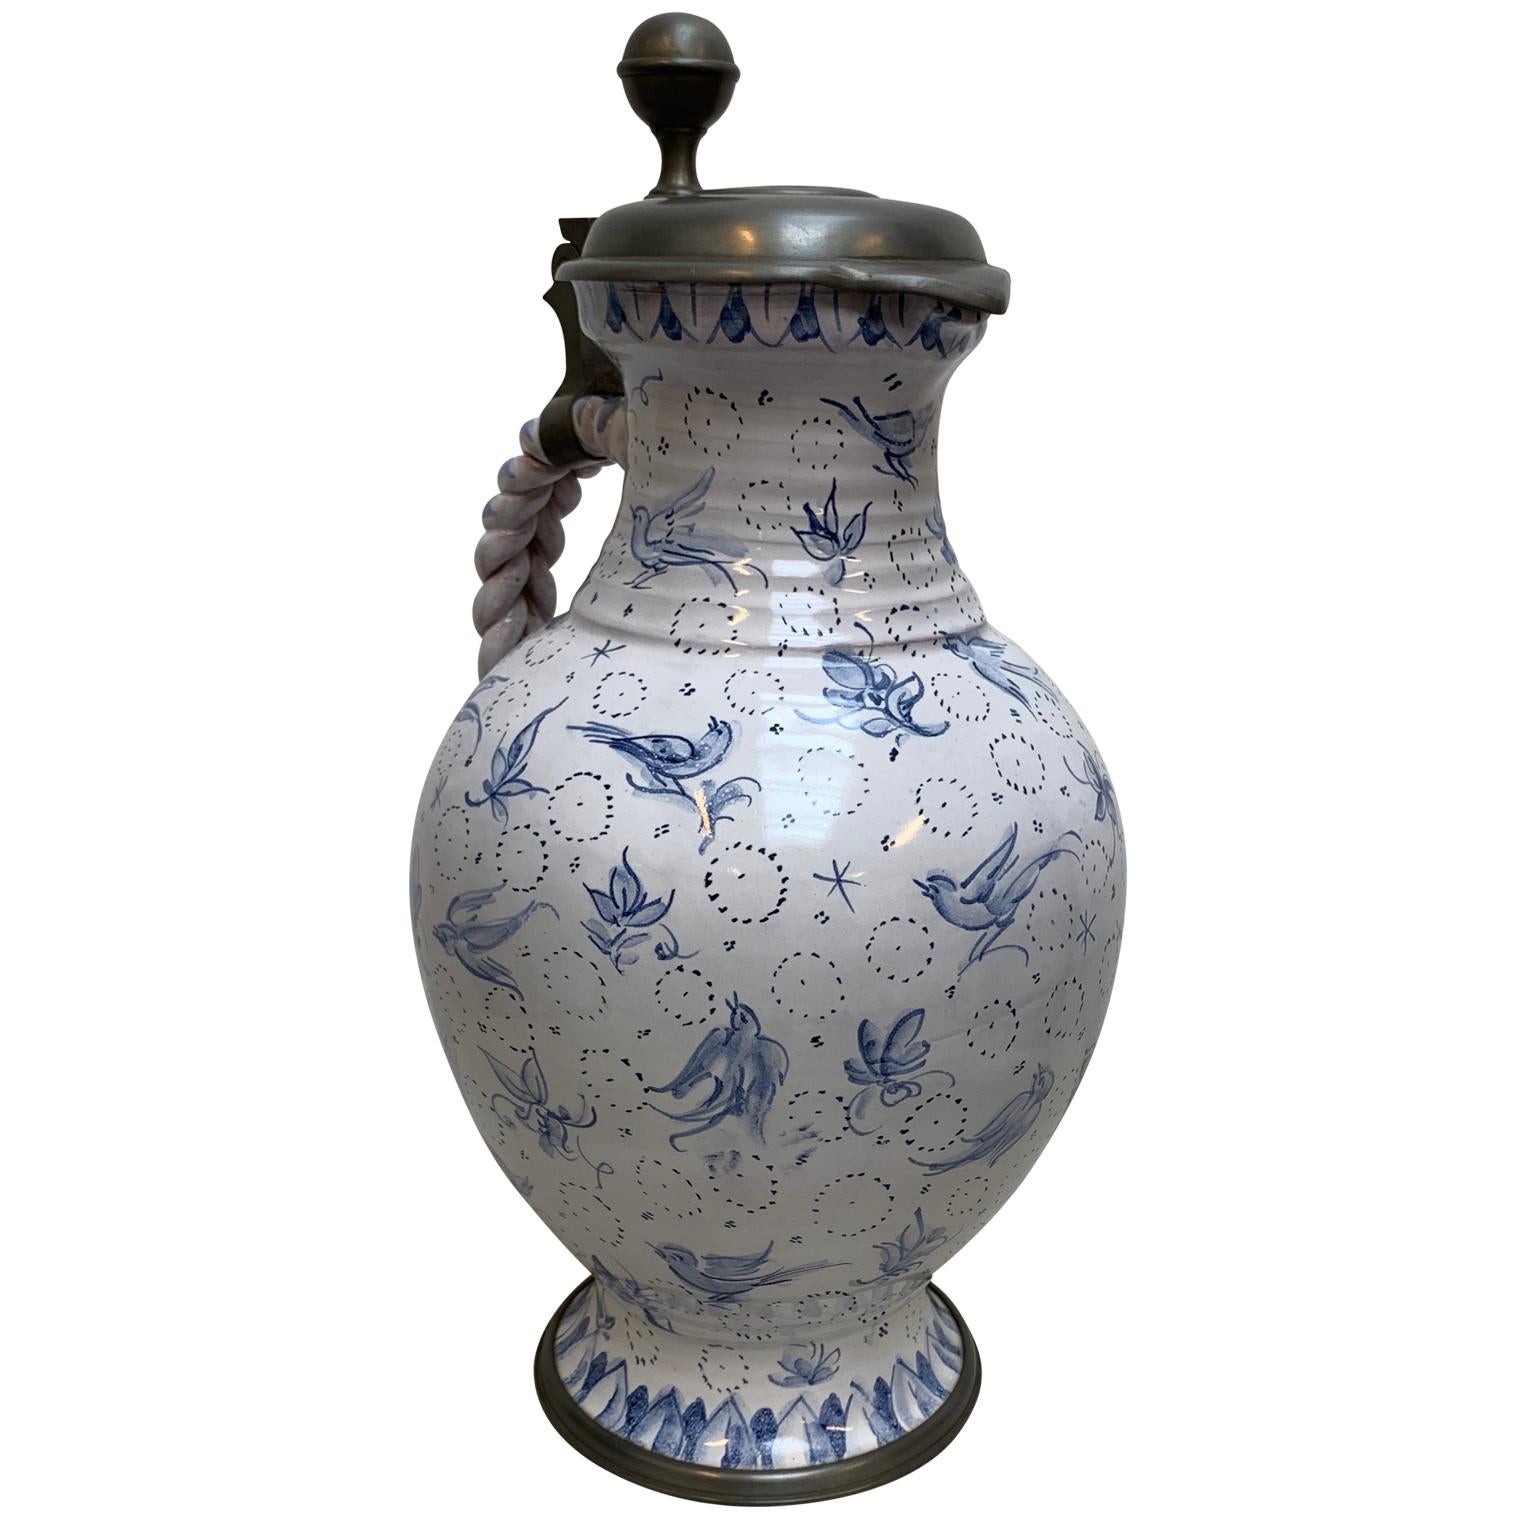 Pewter German Blue and White Faience Enghalskrug, Ansbach Jug, Circa 1780